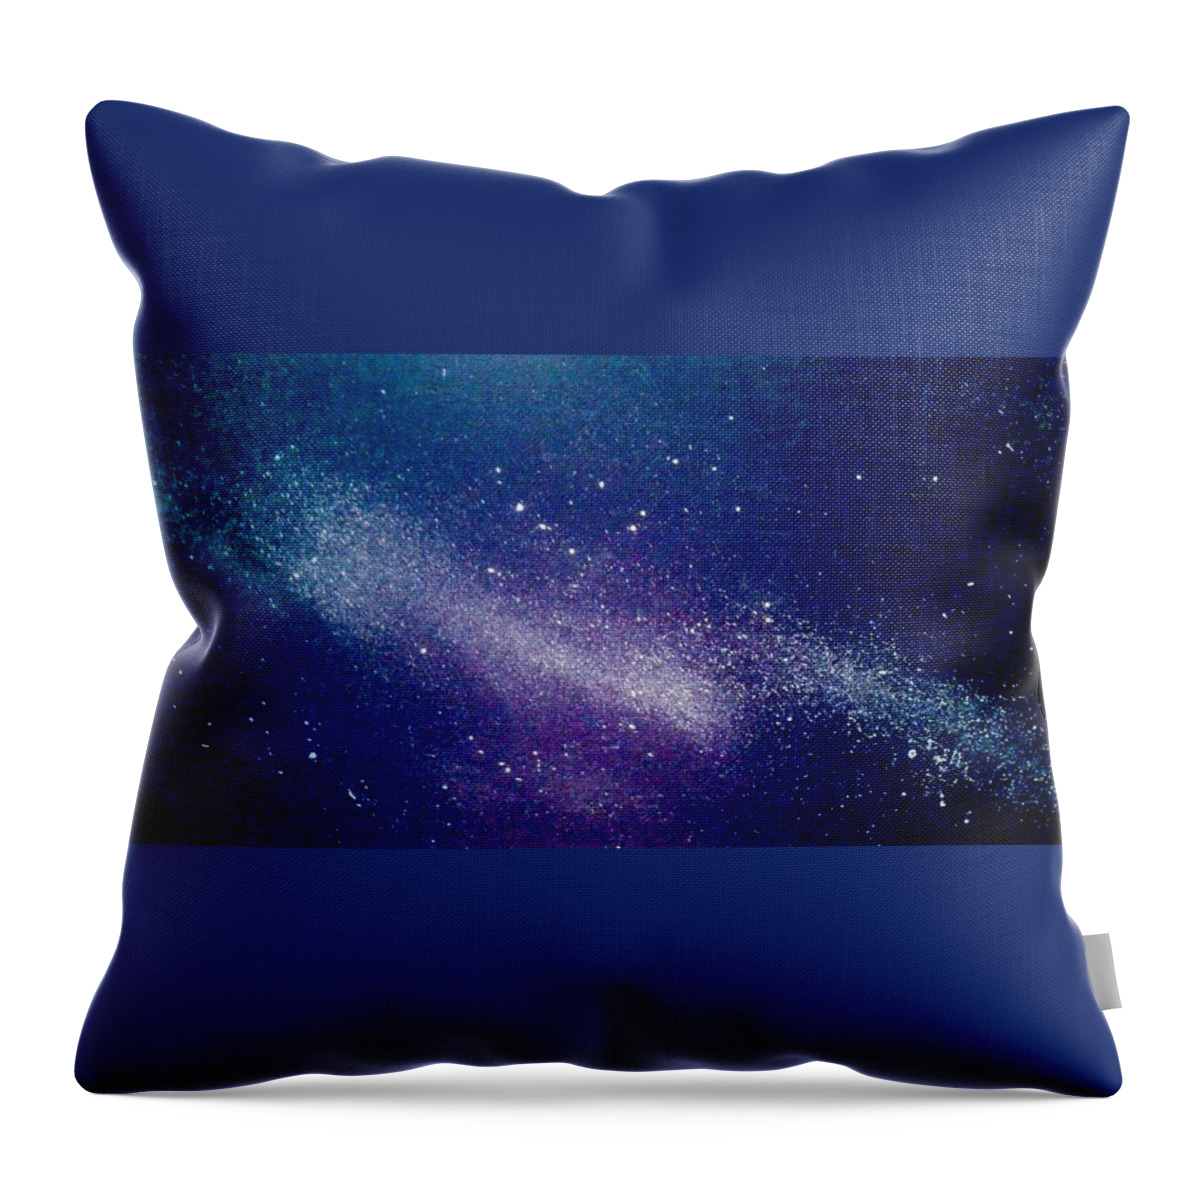 Stars Throw Pillow featuring the painting Milky Way by James RODERICK